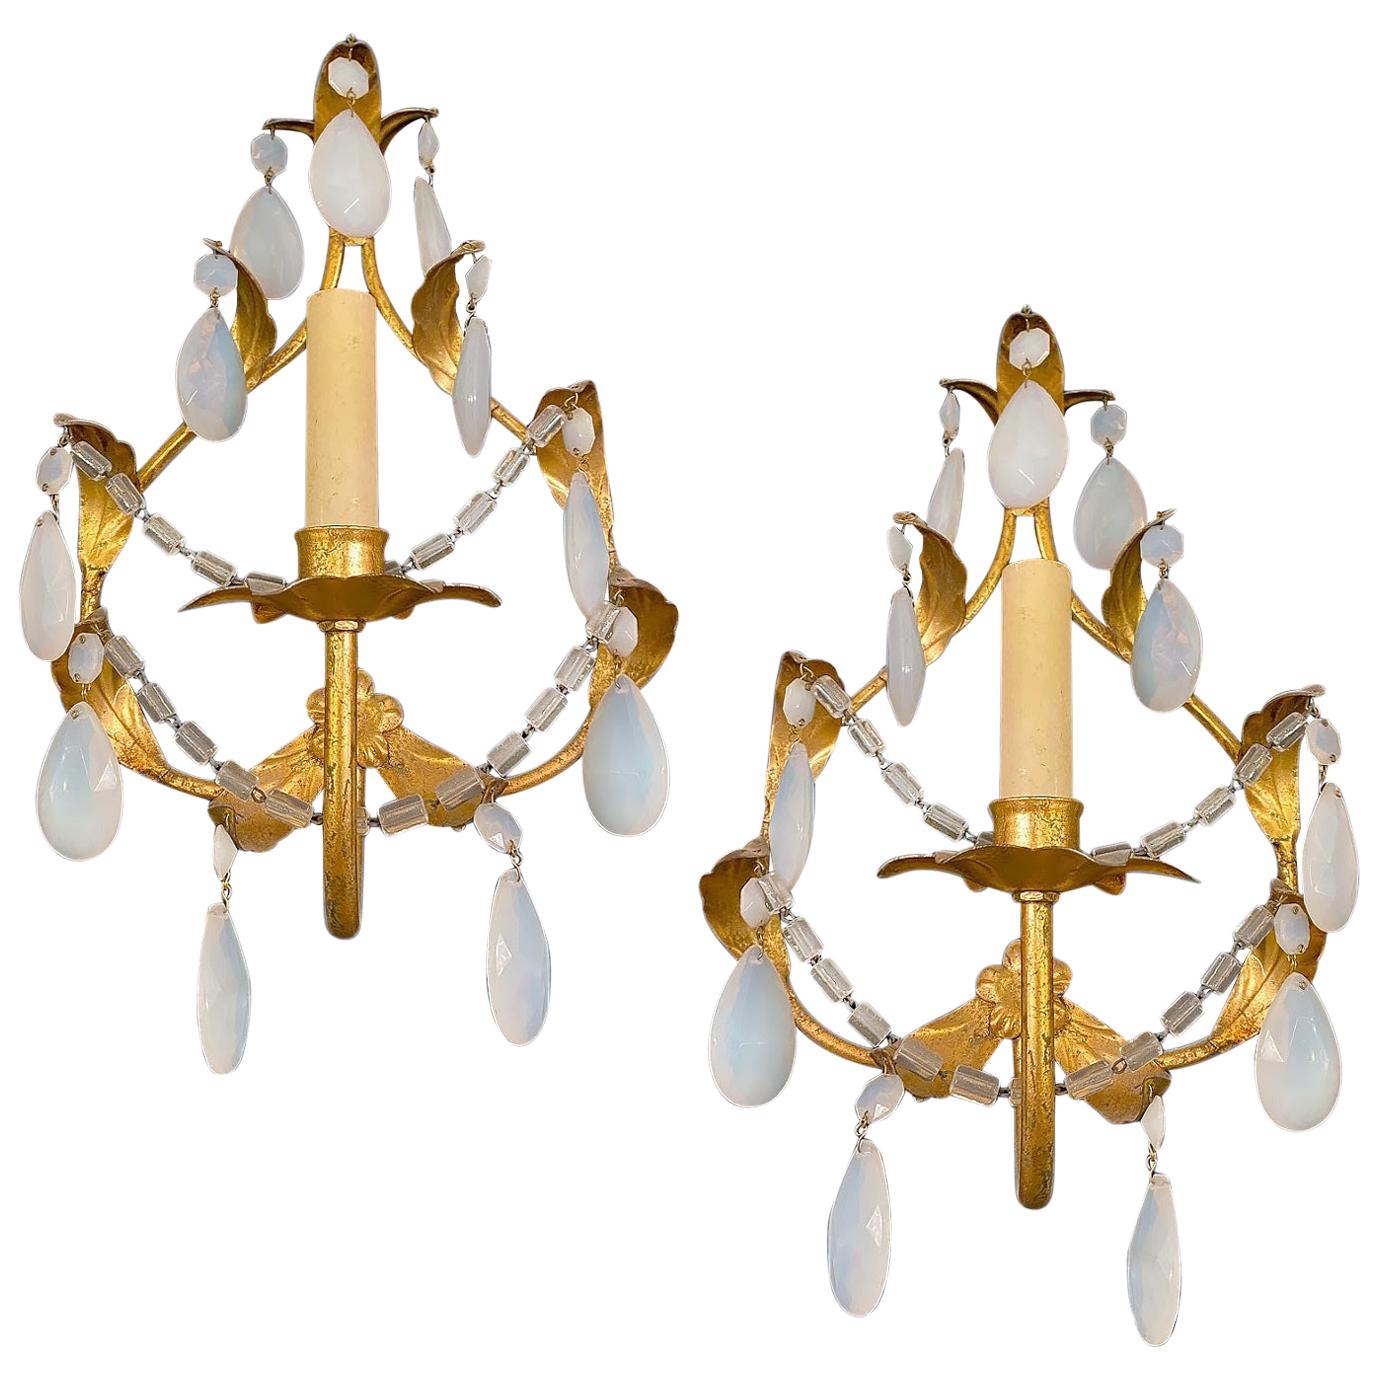 Pair of Gilt Sconces with Opaline Drops